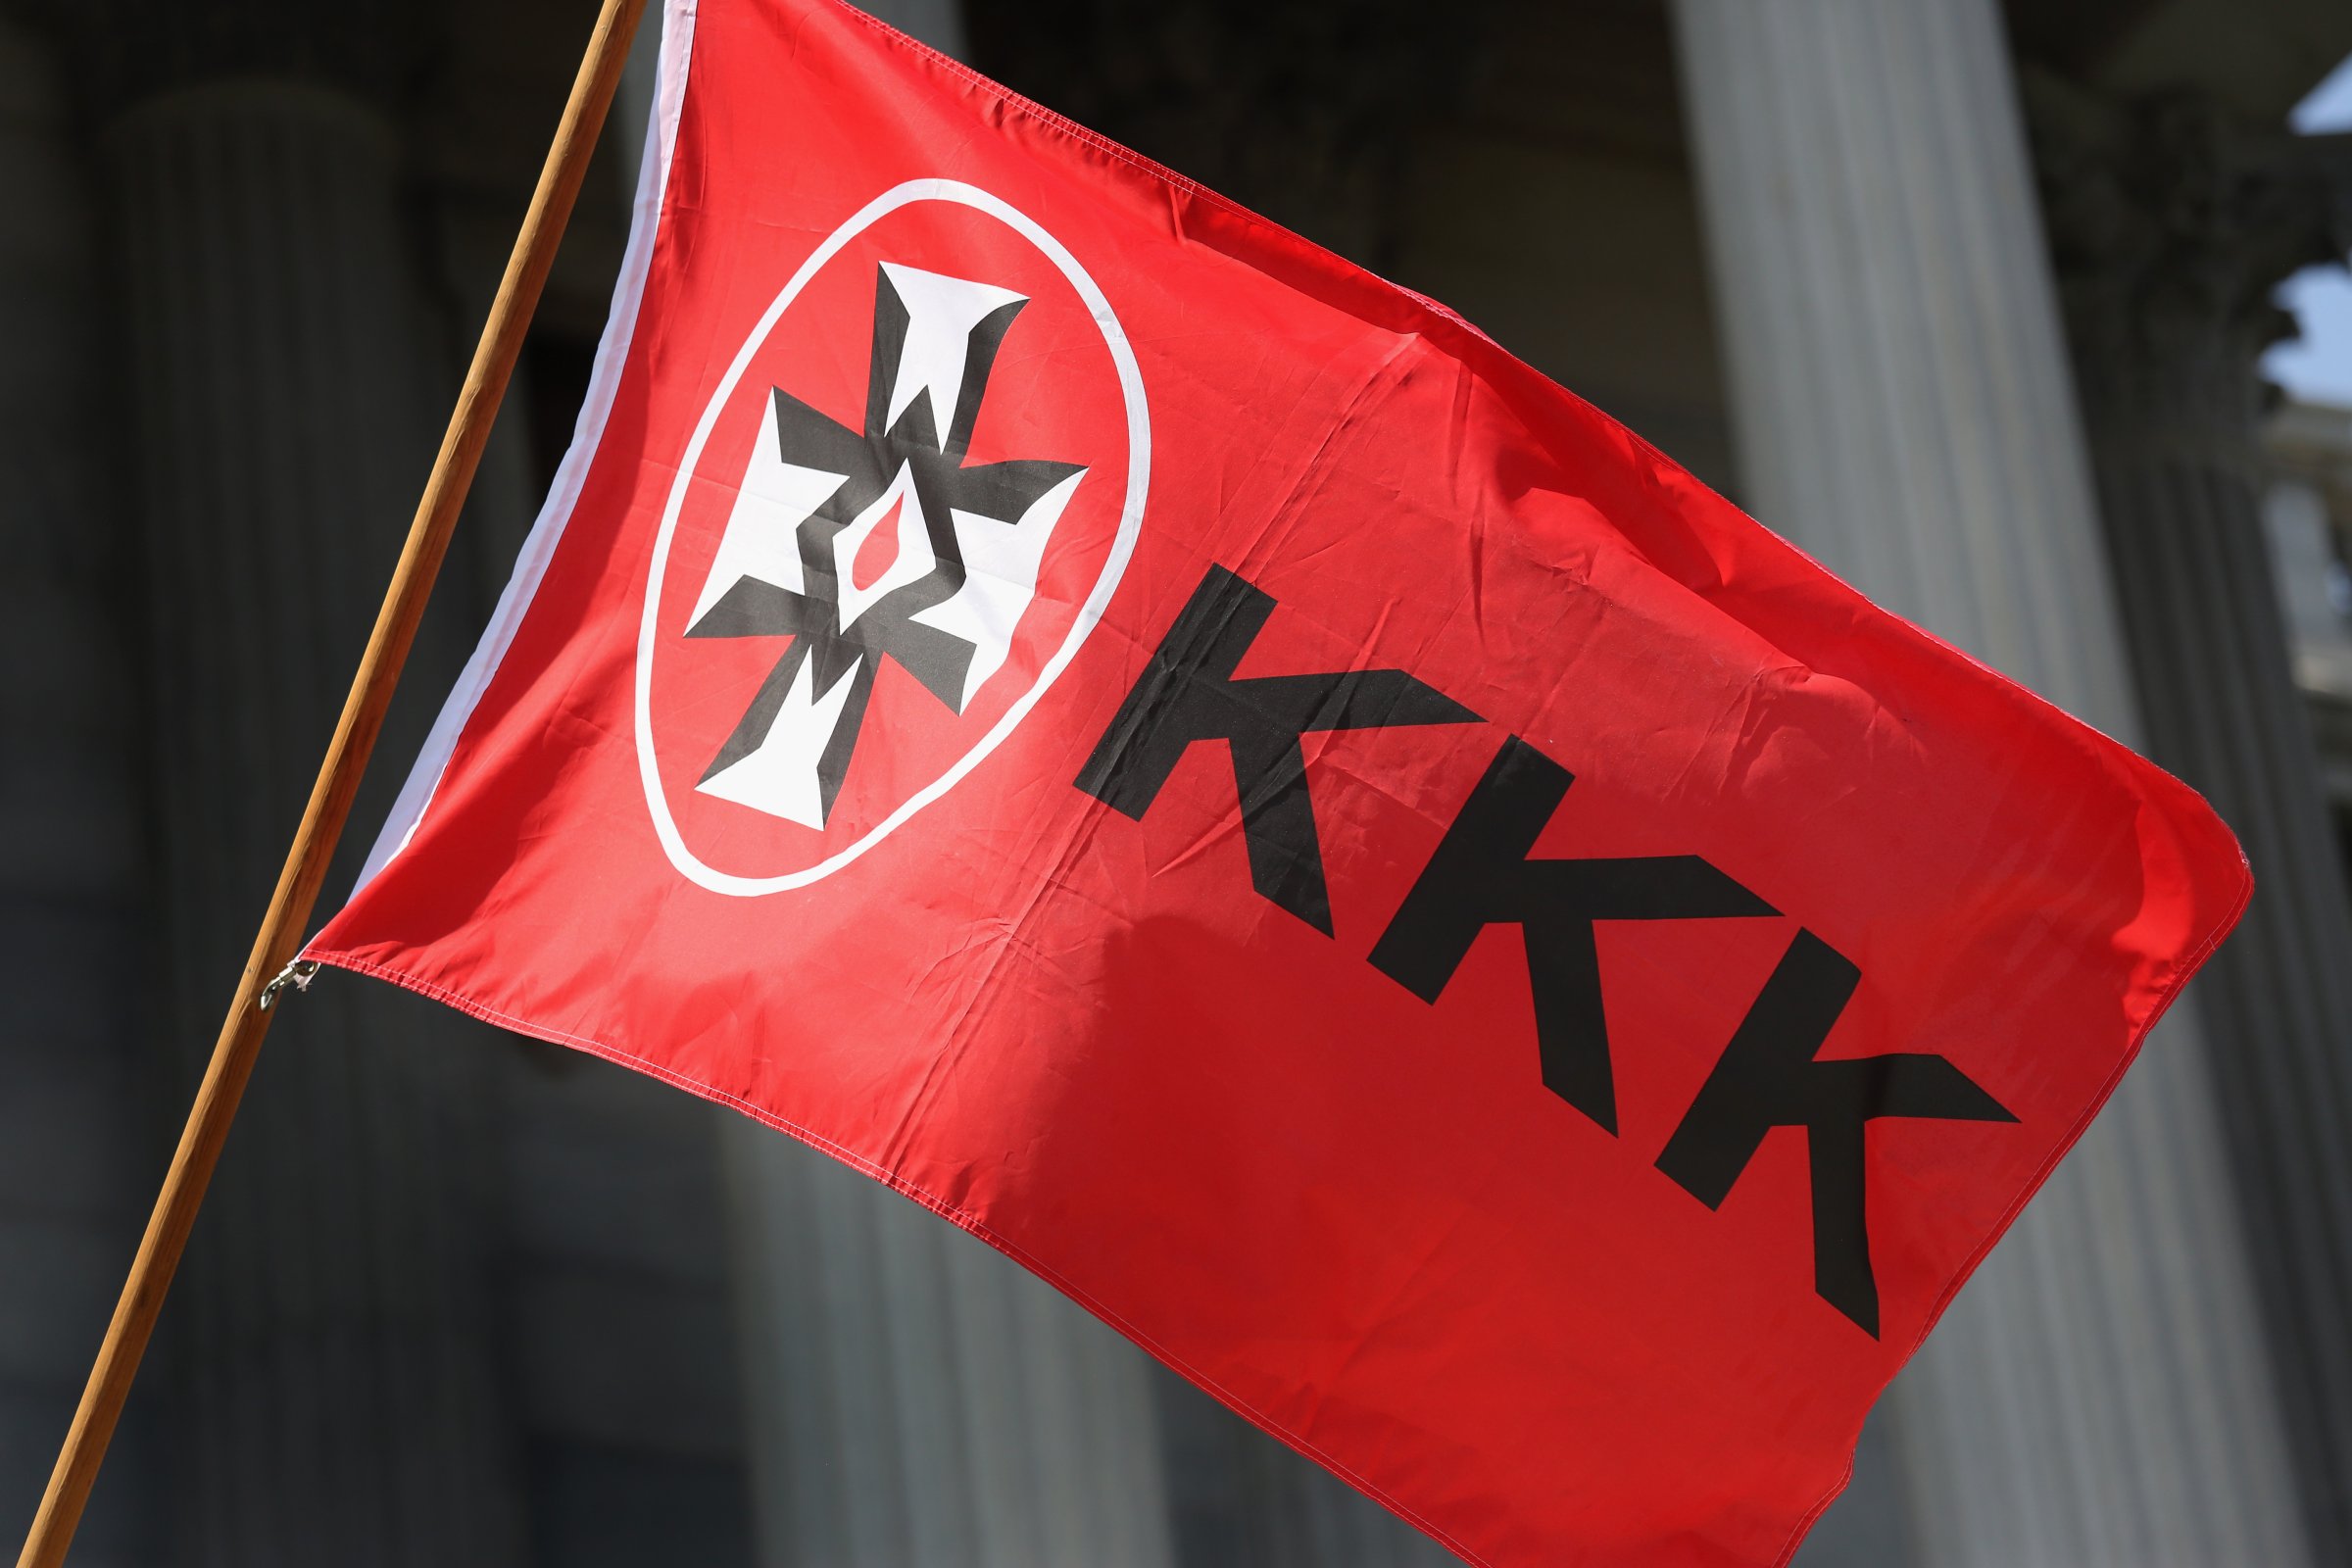 A Ku Klux Klan flag flies during a demonstration at the state house building on July 18, 2015 in Columbia, S.C.